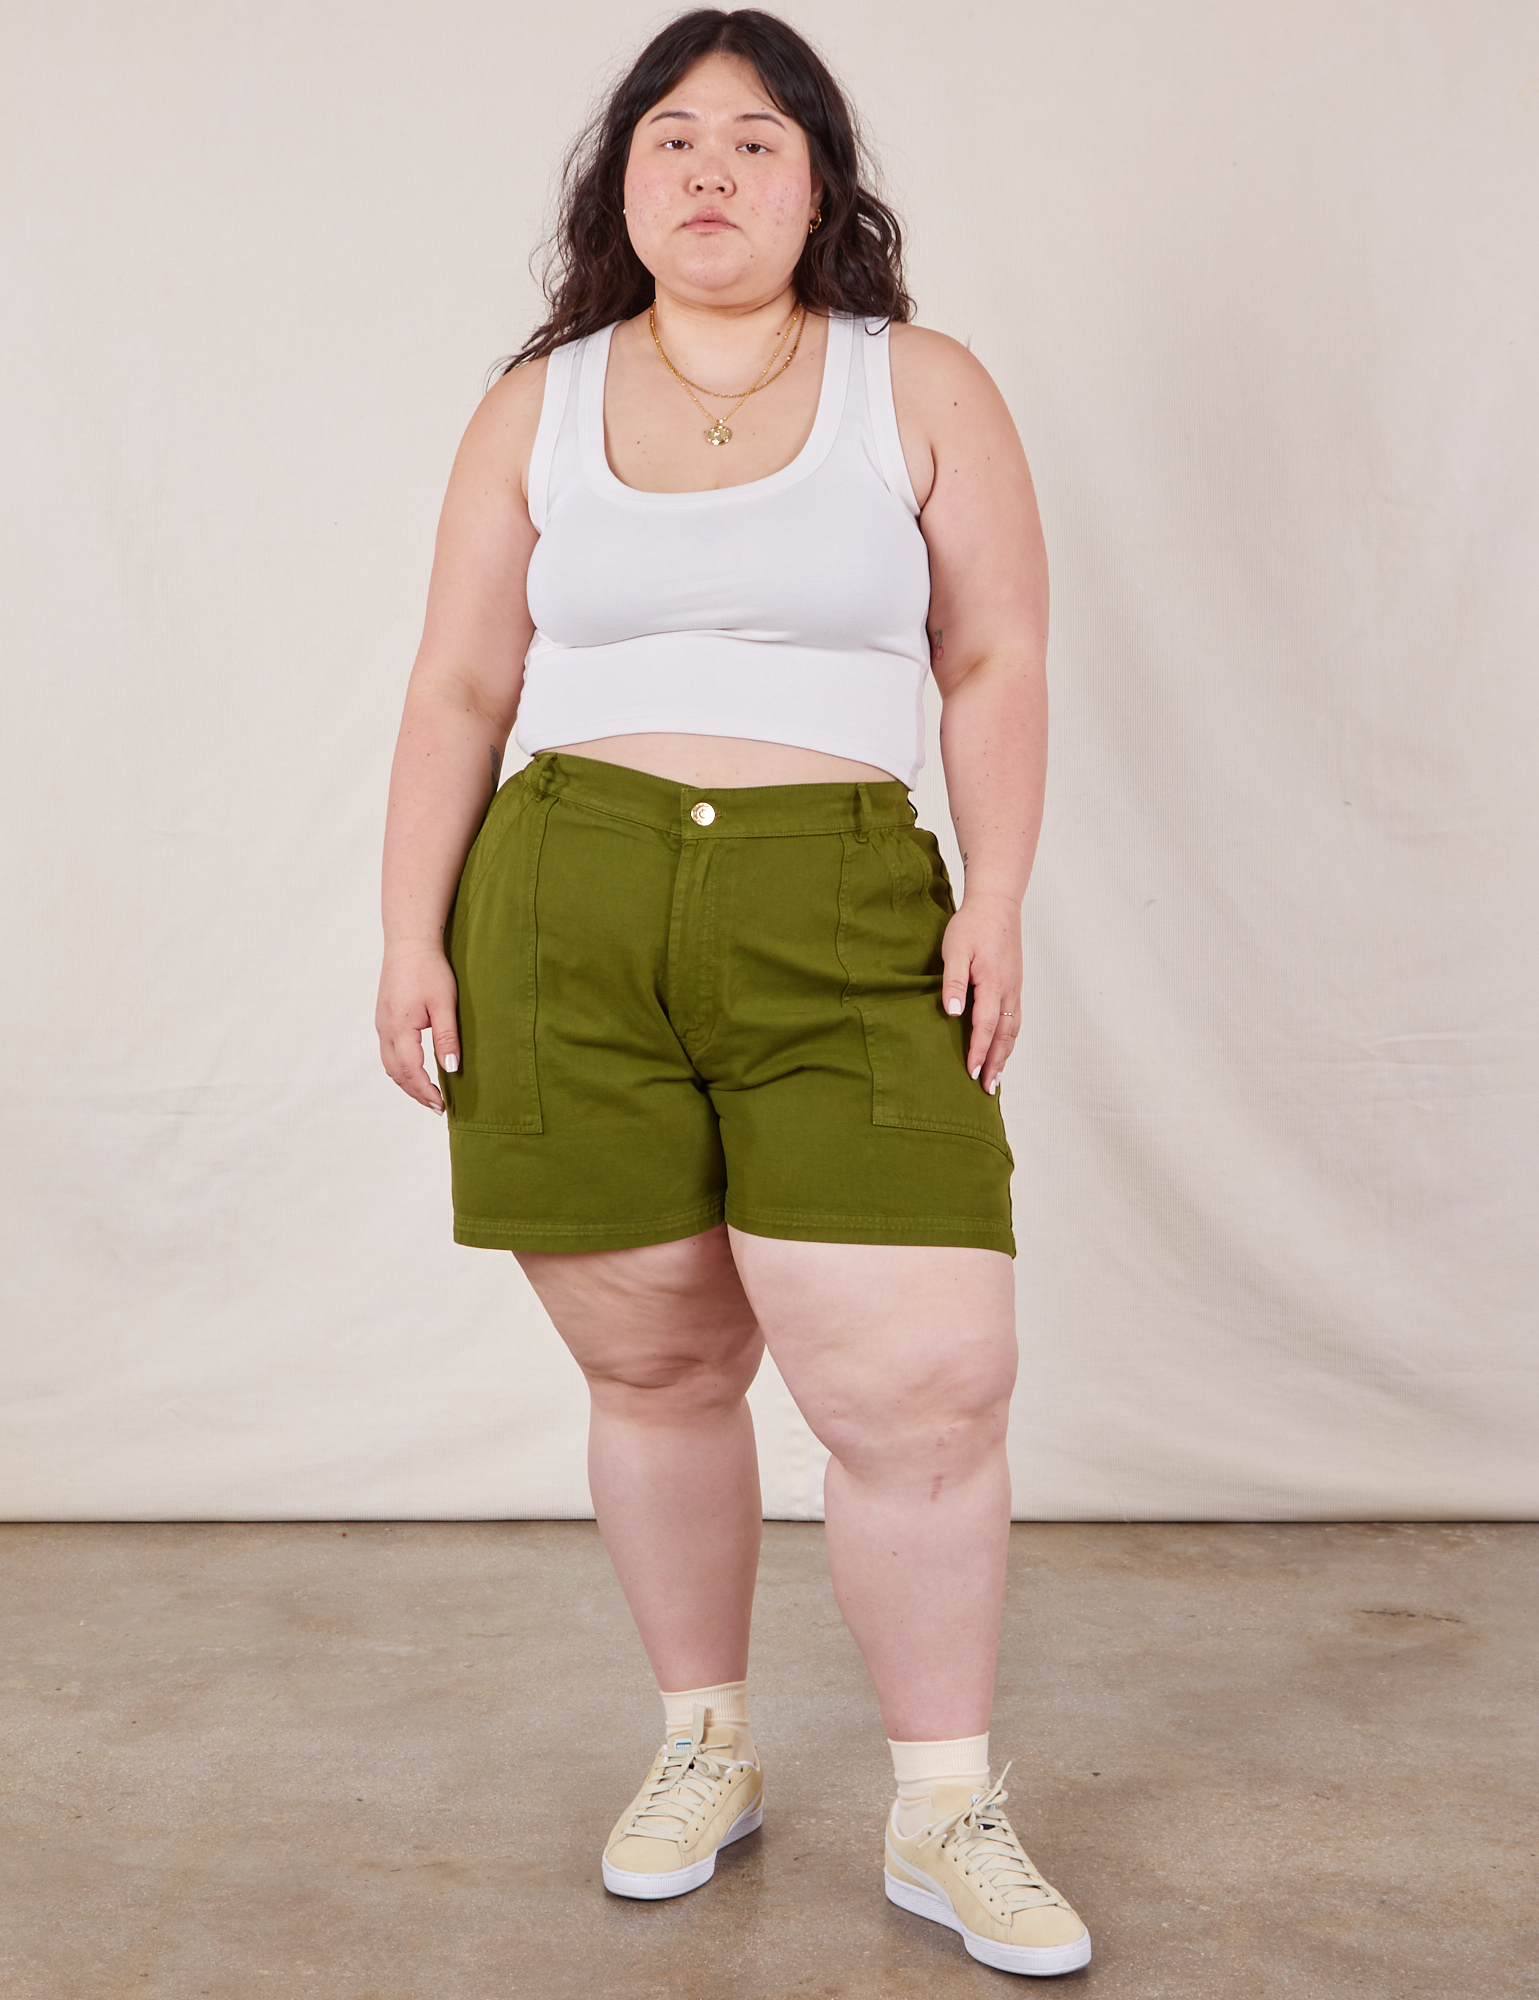 Ashley is 5’7” and wearing 1XL Classic Work Shorts in Summer Olive paired with a Cropped Tank Top in vintage tee off-white